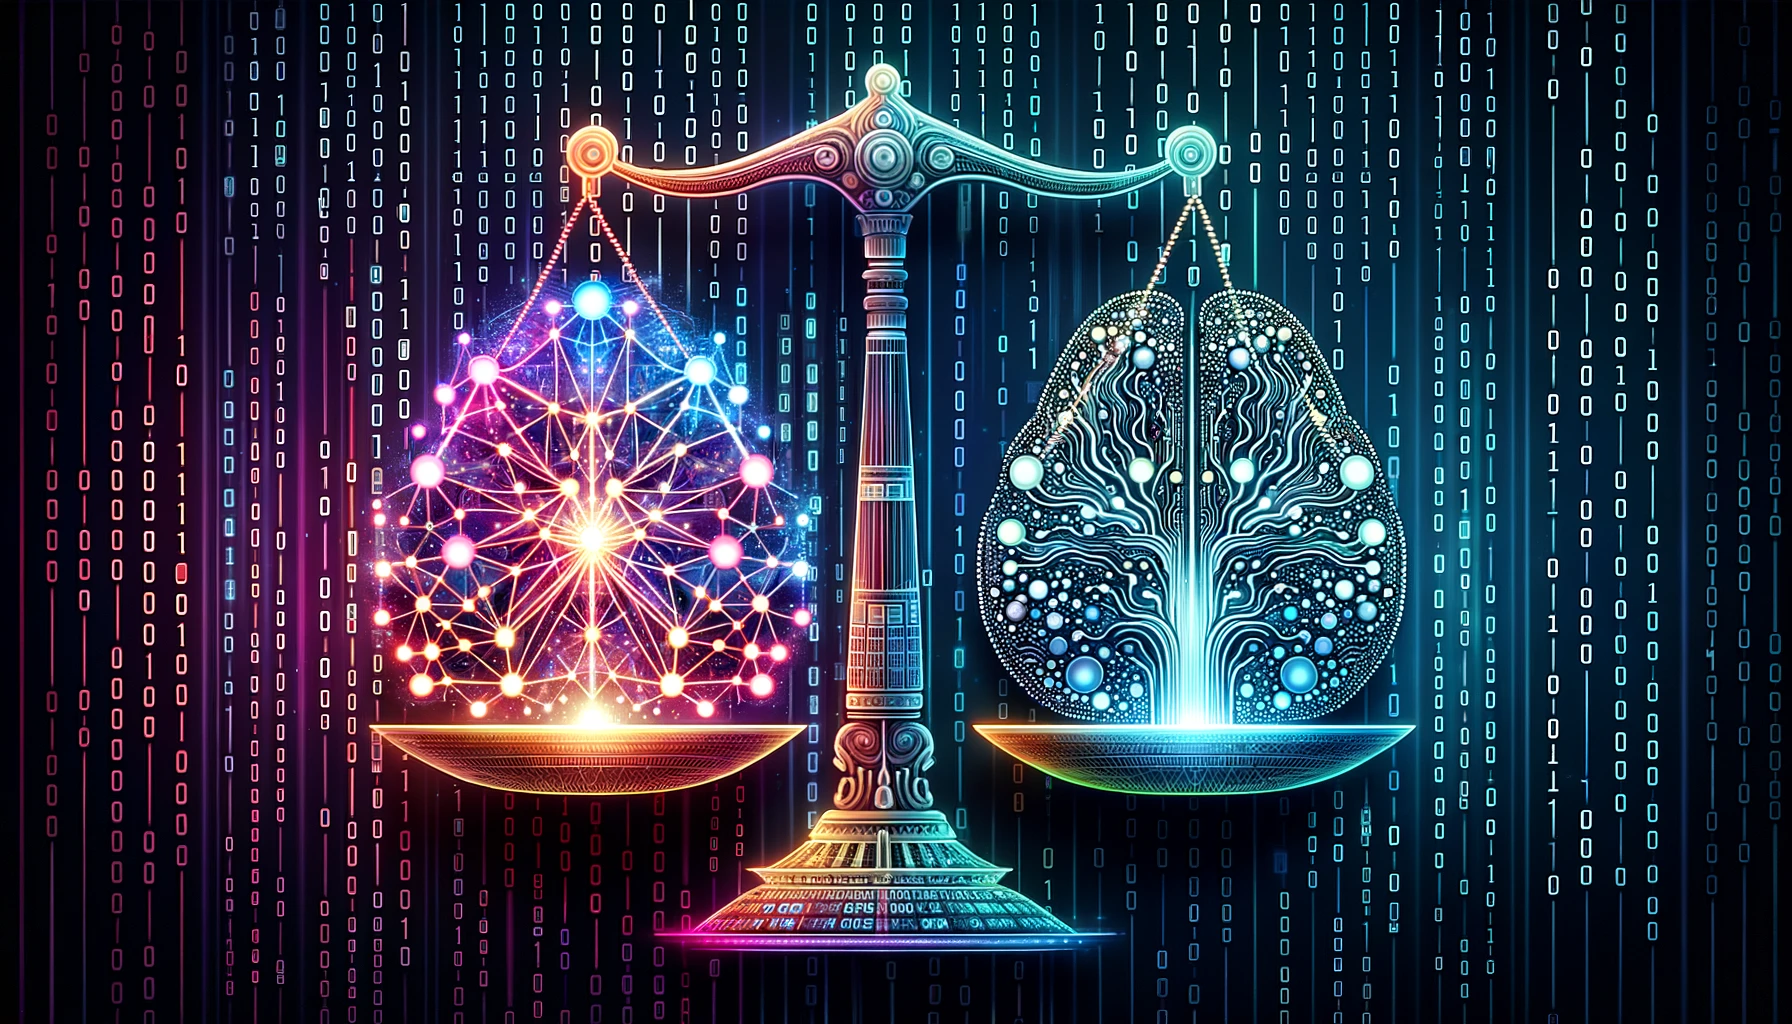 Digital scale balancing neural network and traditional algorithm, symbolizing the distinctions between deep learning and machine learning.